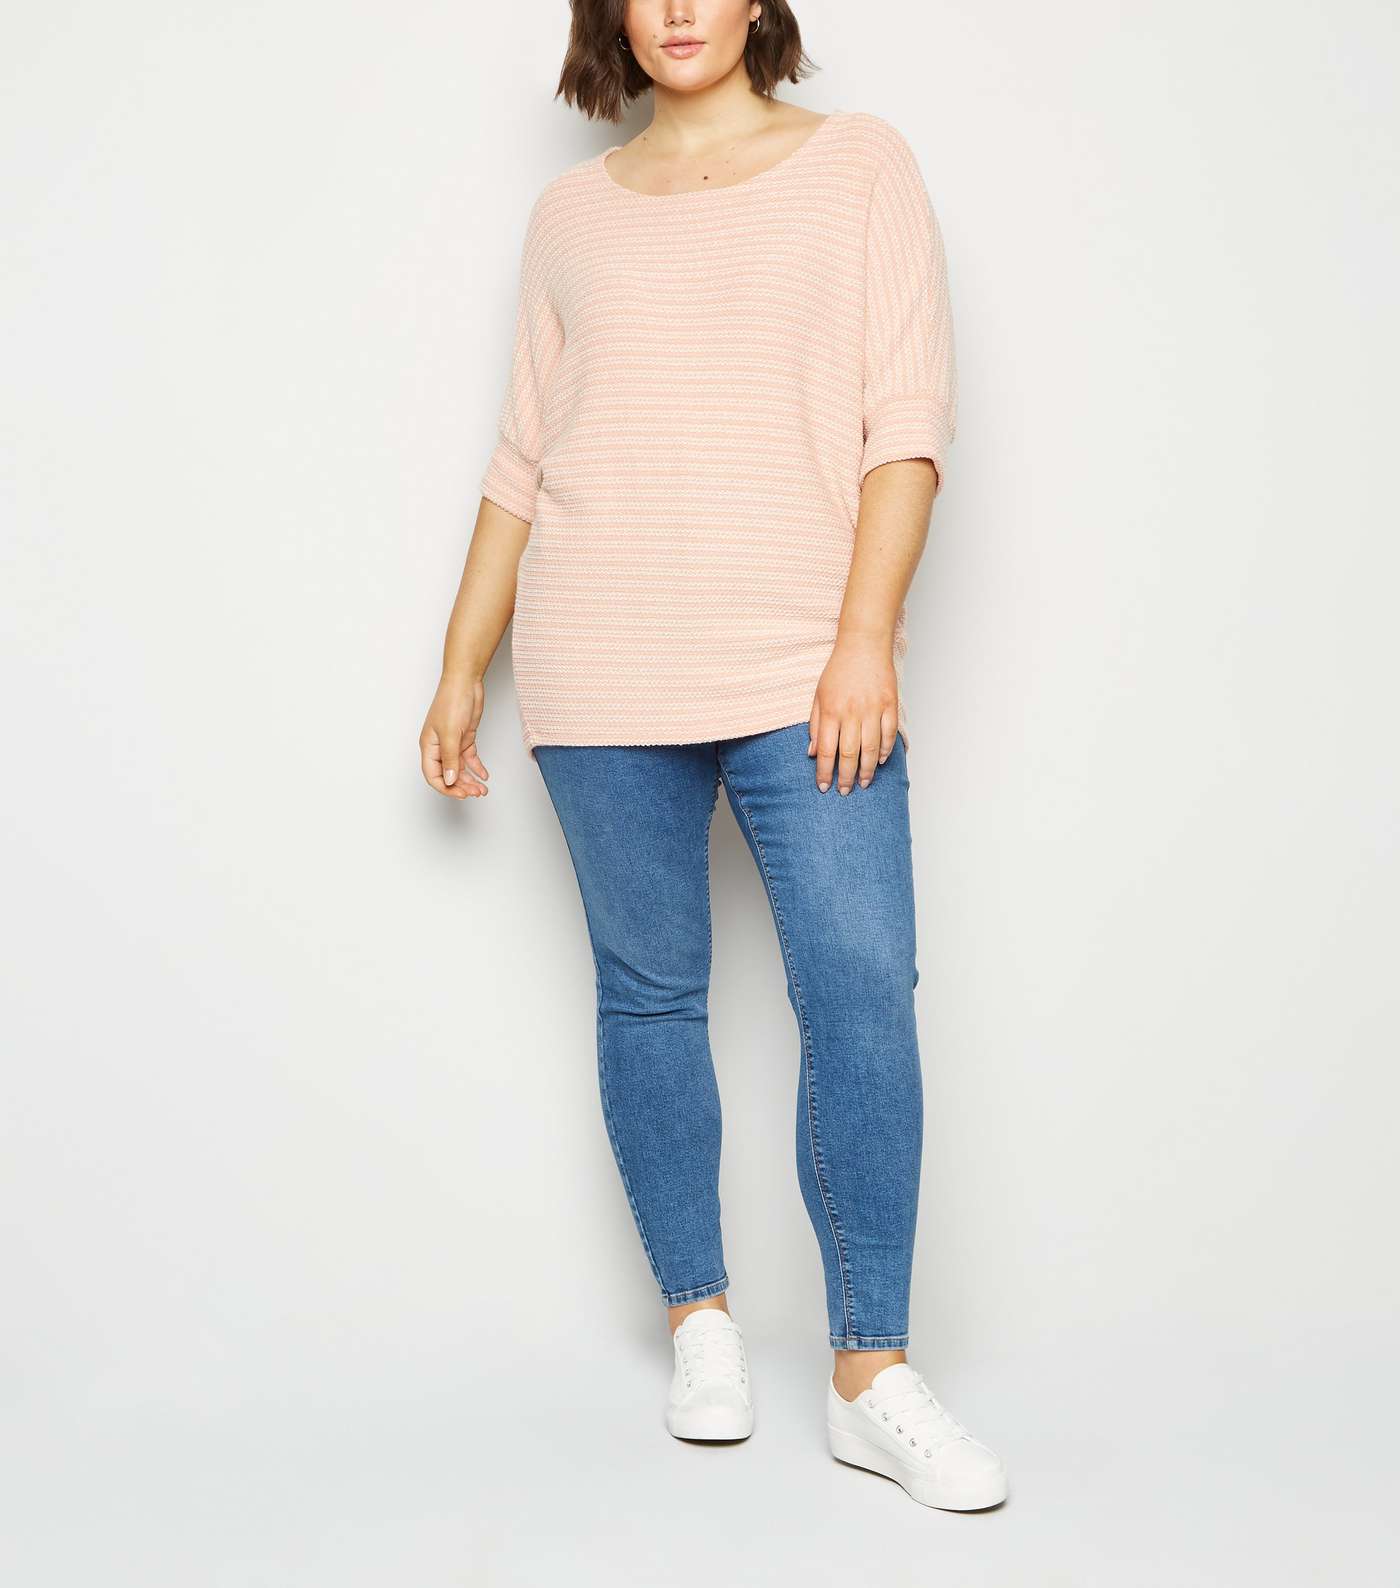 Apricot Curves Pink Batwing Waffle Knit Top Image 2